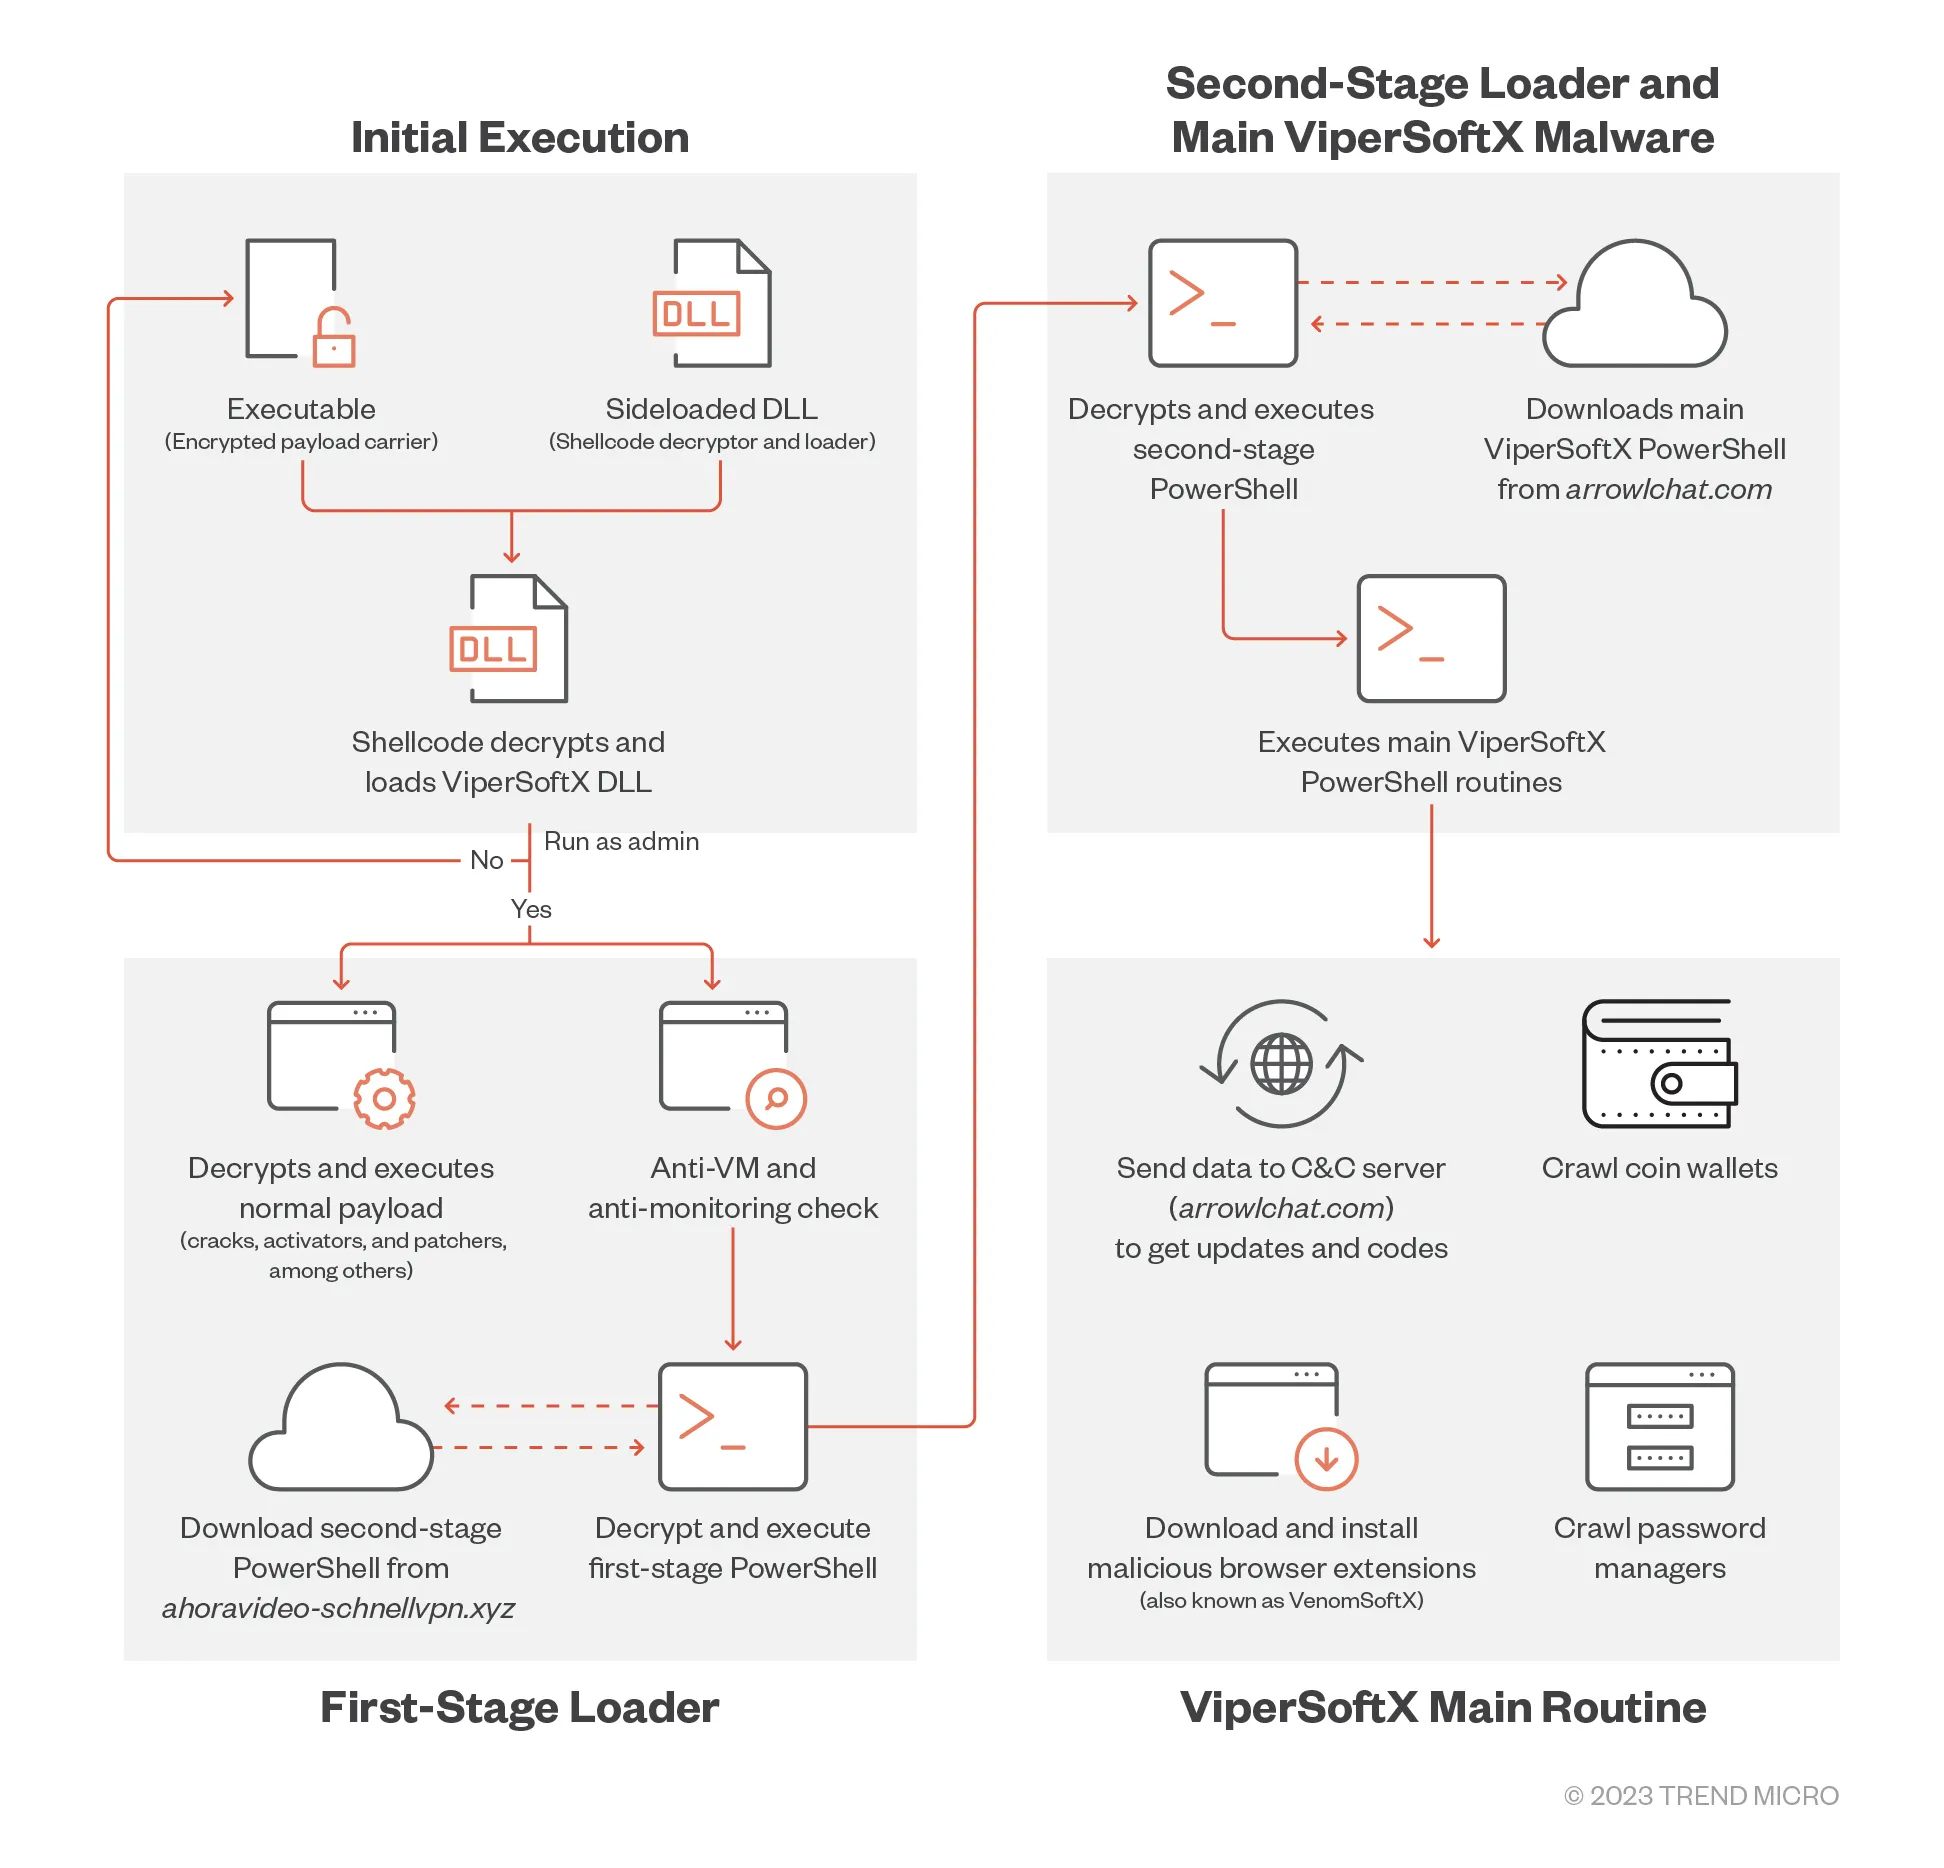 ViperSoftX uses more sophisticated encryption and anti-analysis techniques